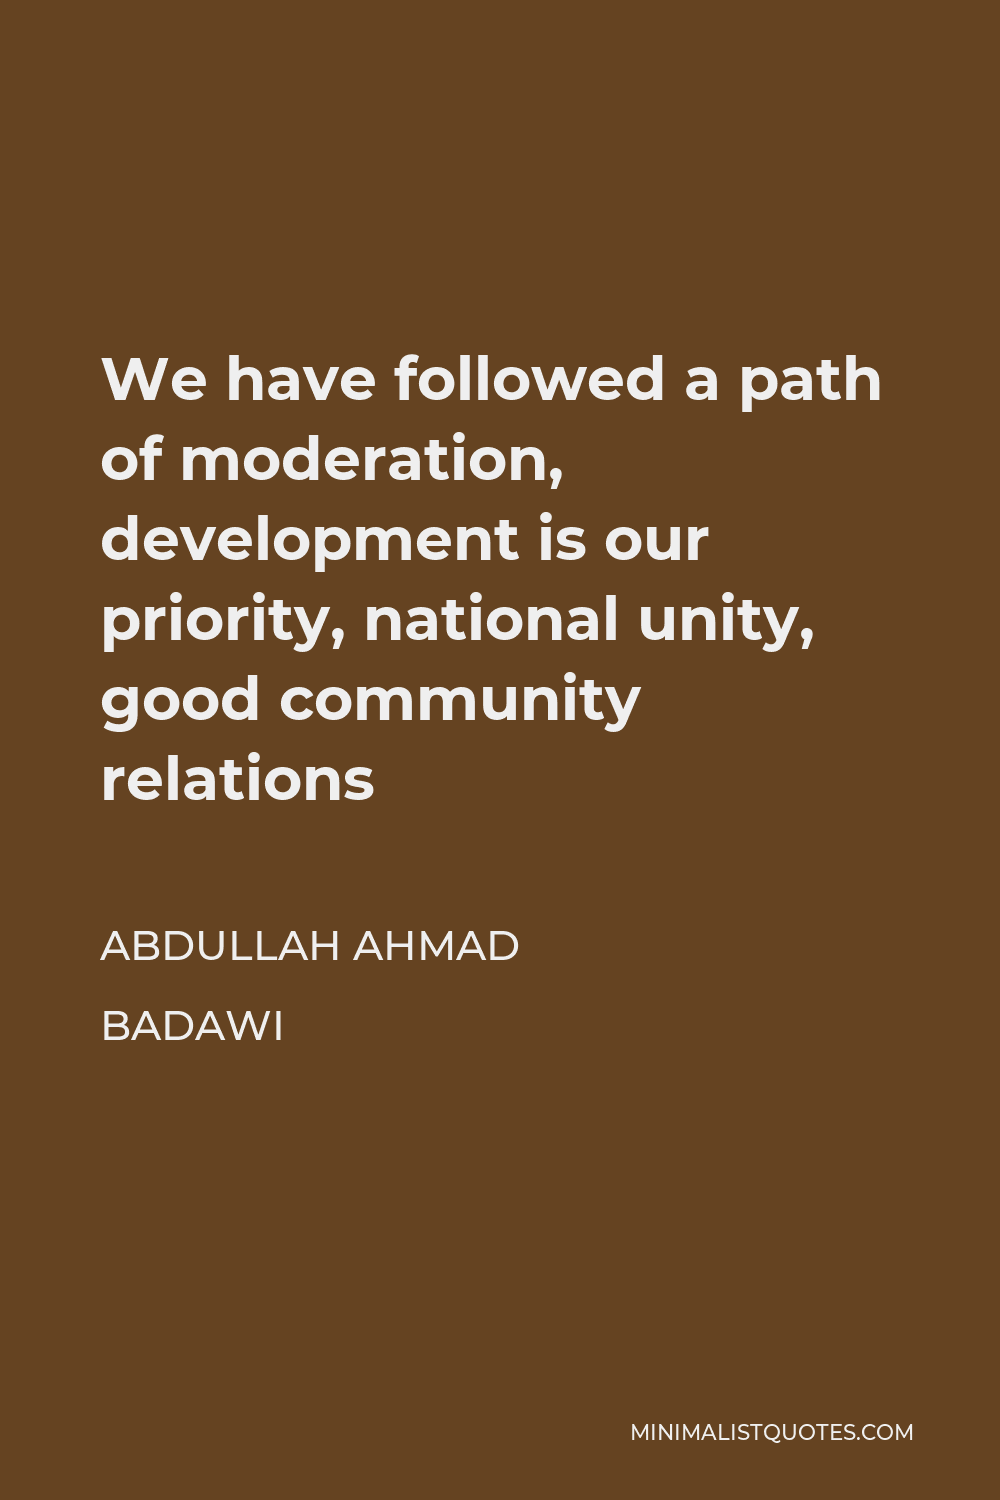 Abdullah Ahmad Badawi Quote - We have followed a path of moderation, development is our priority, national unity, good community relations